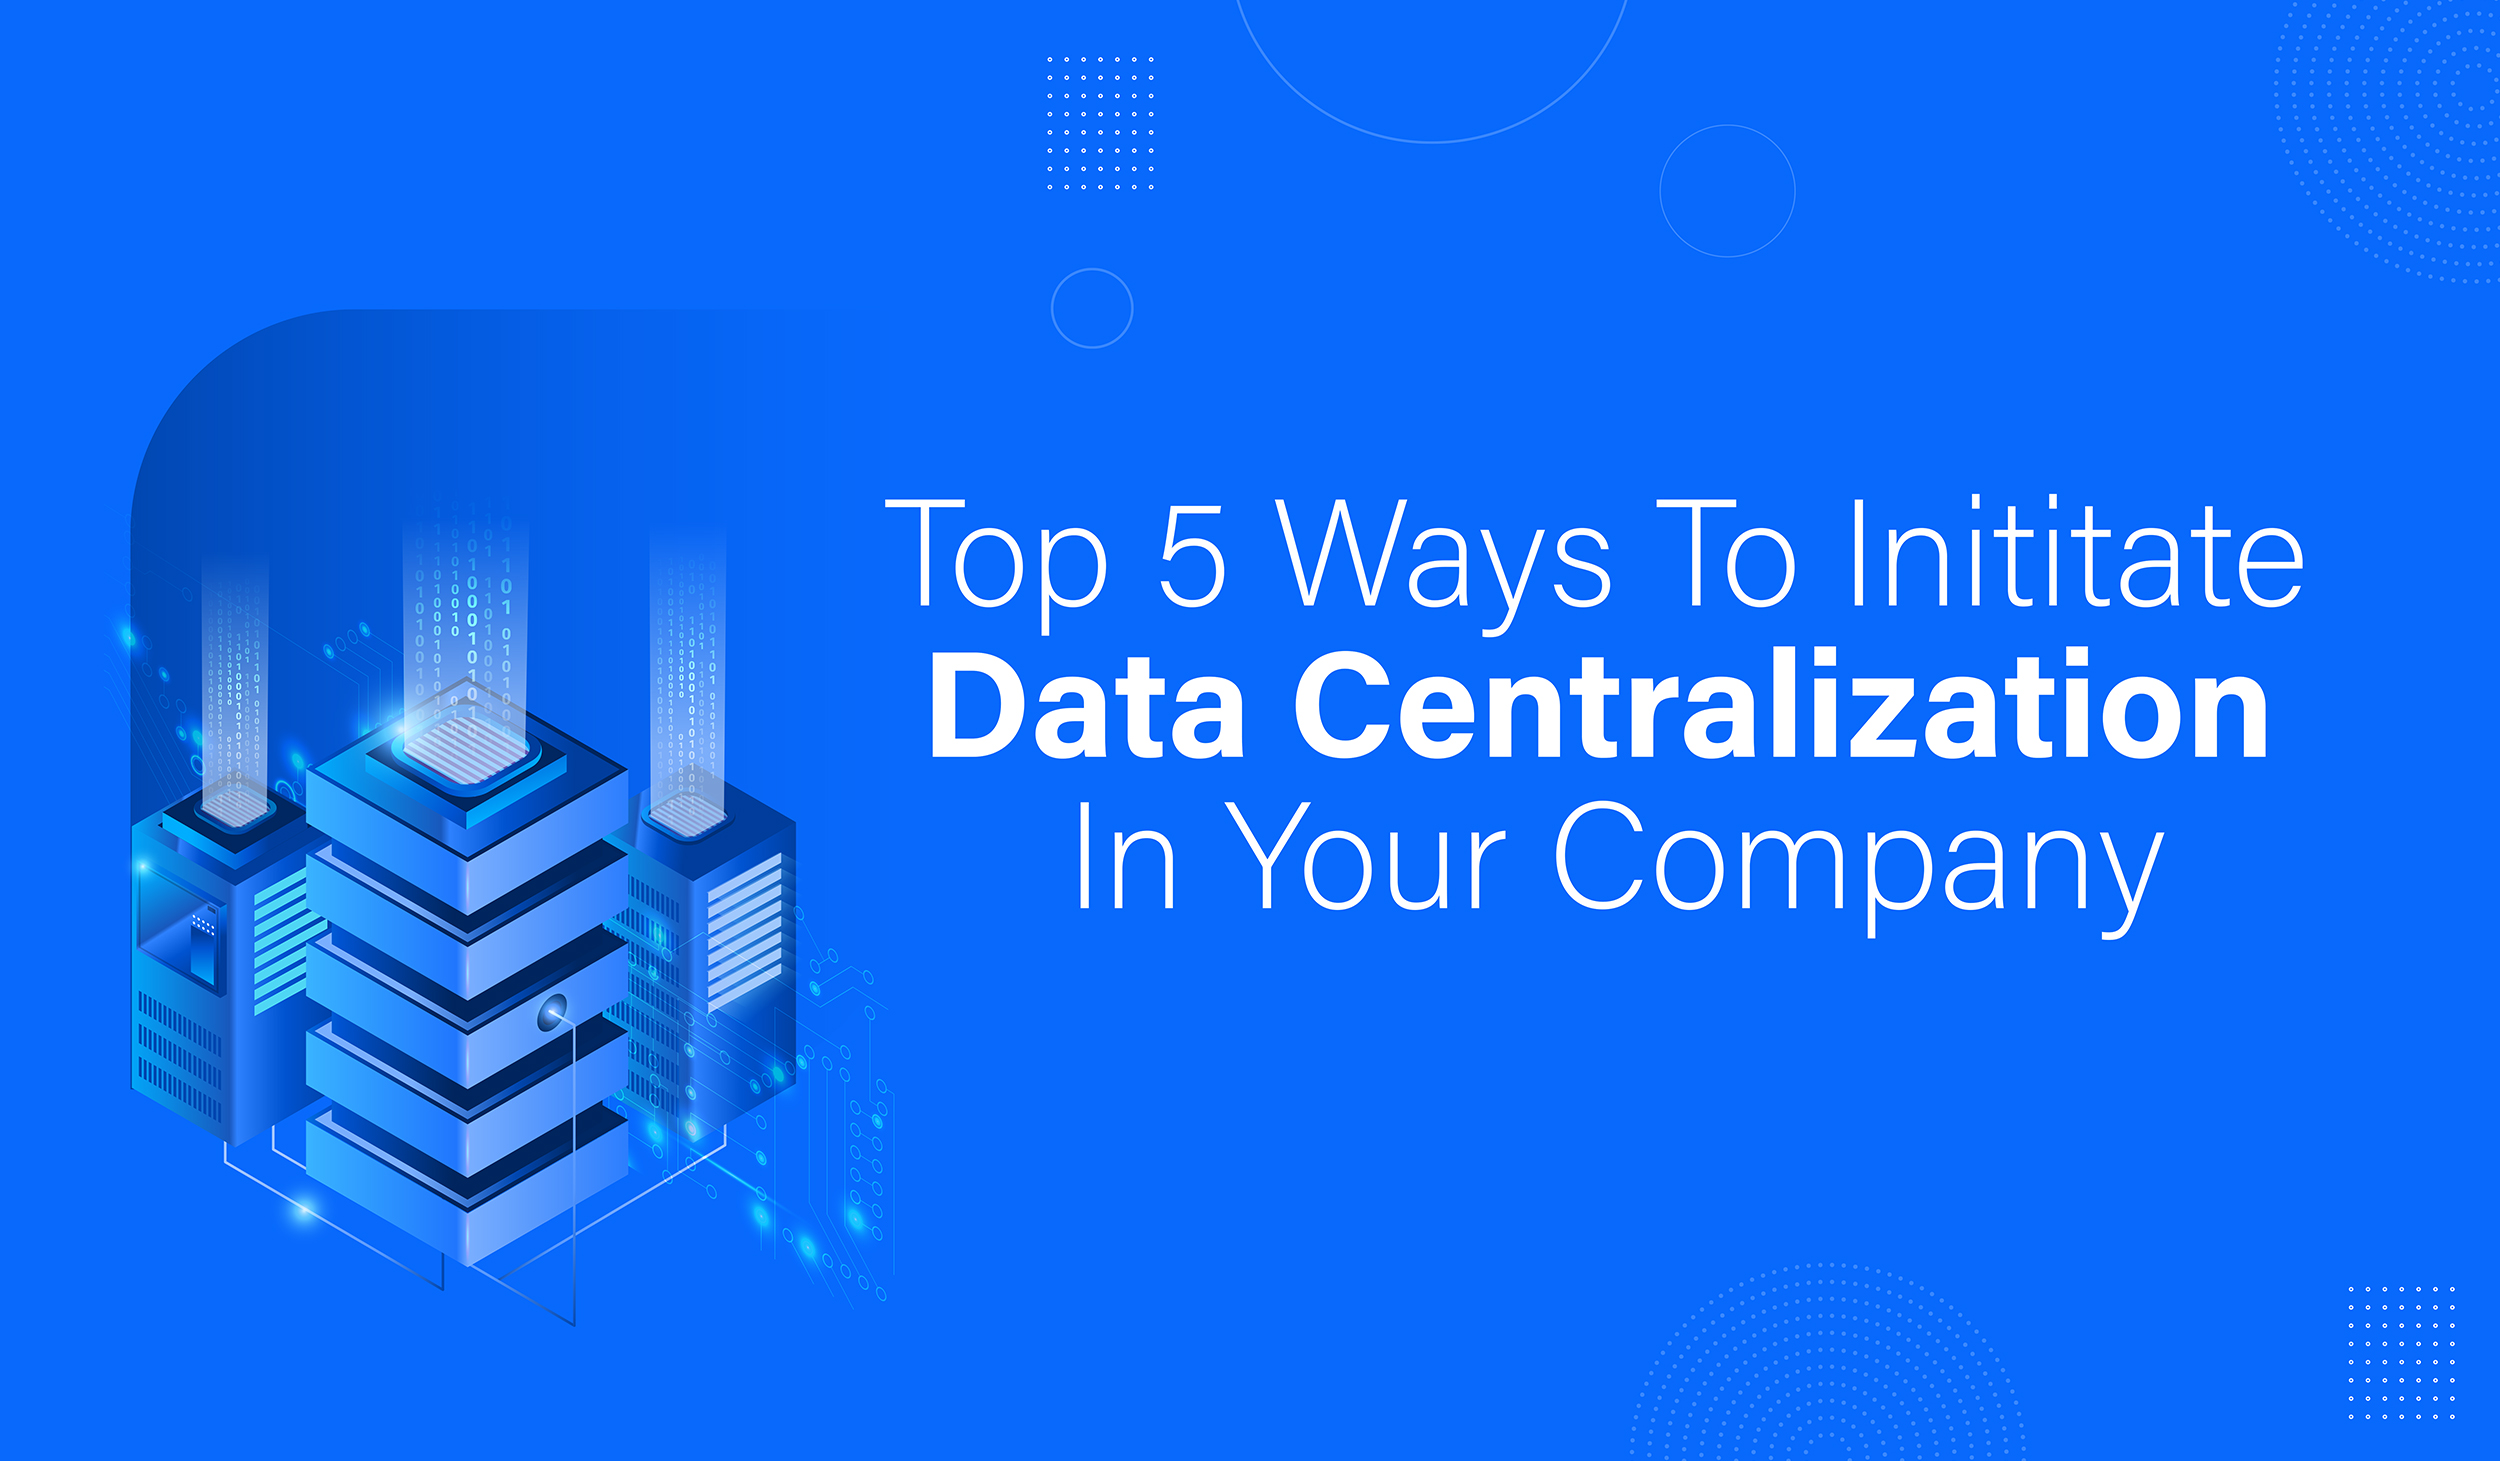 Top 5 ways for Data centralization in your company 6